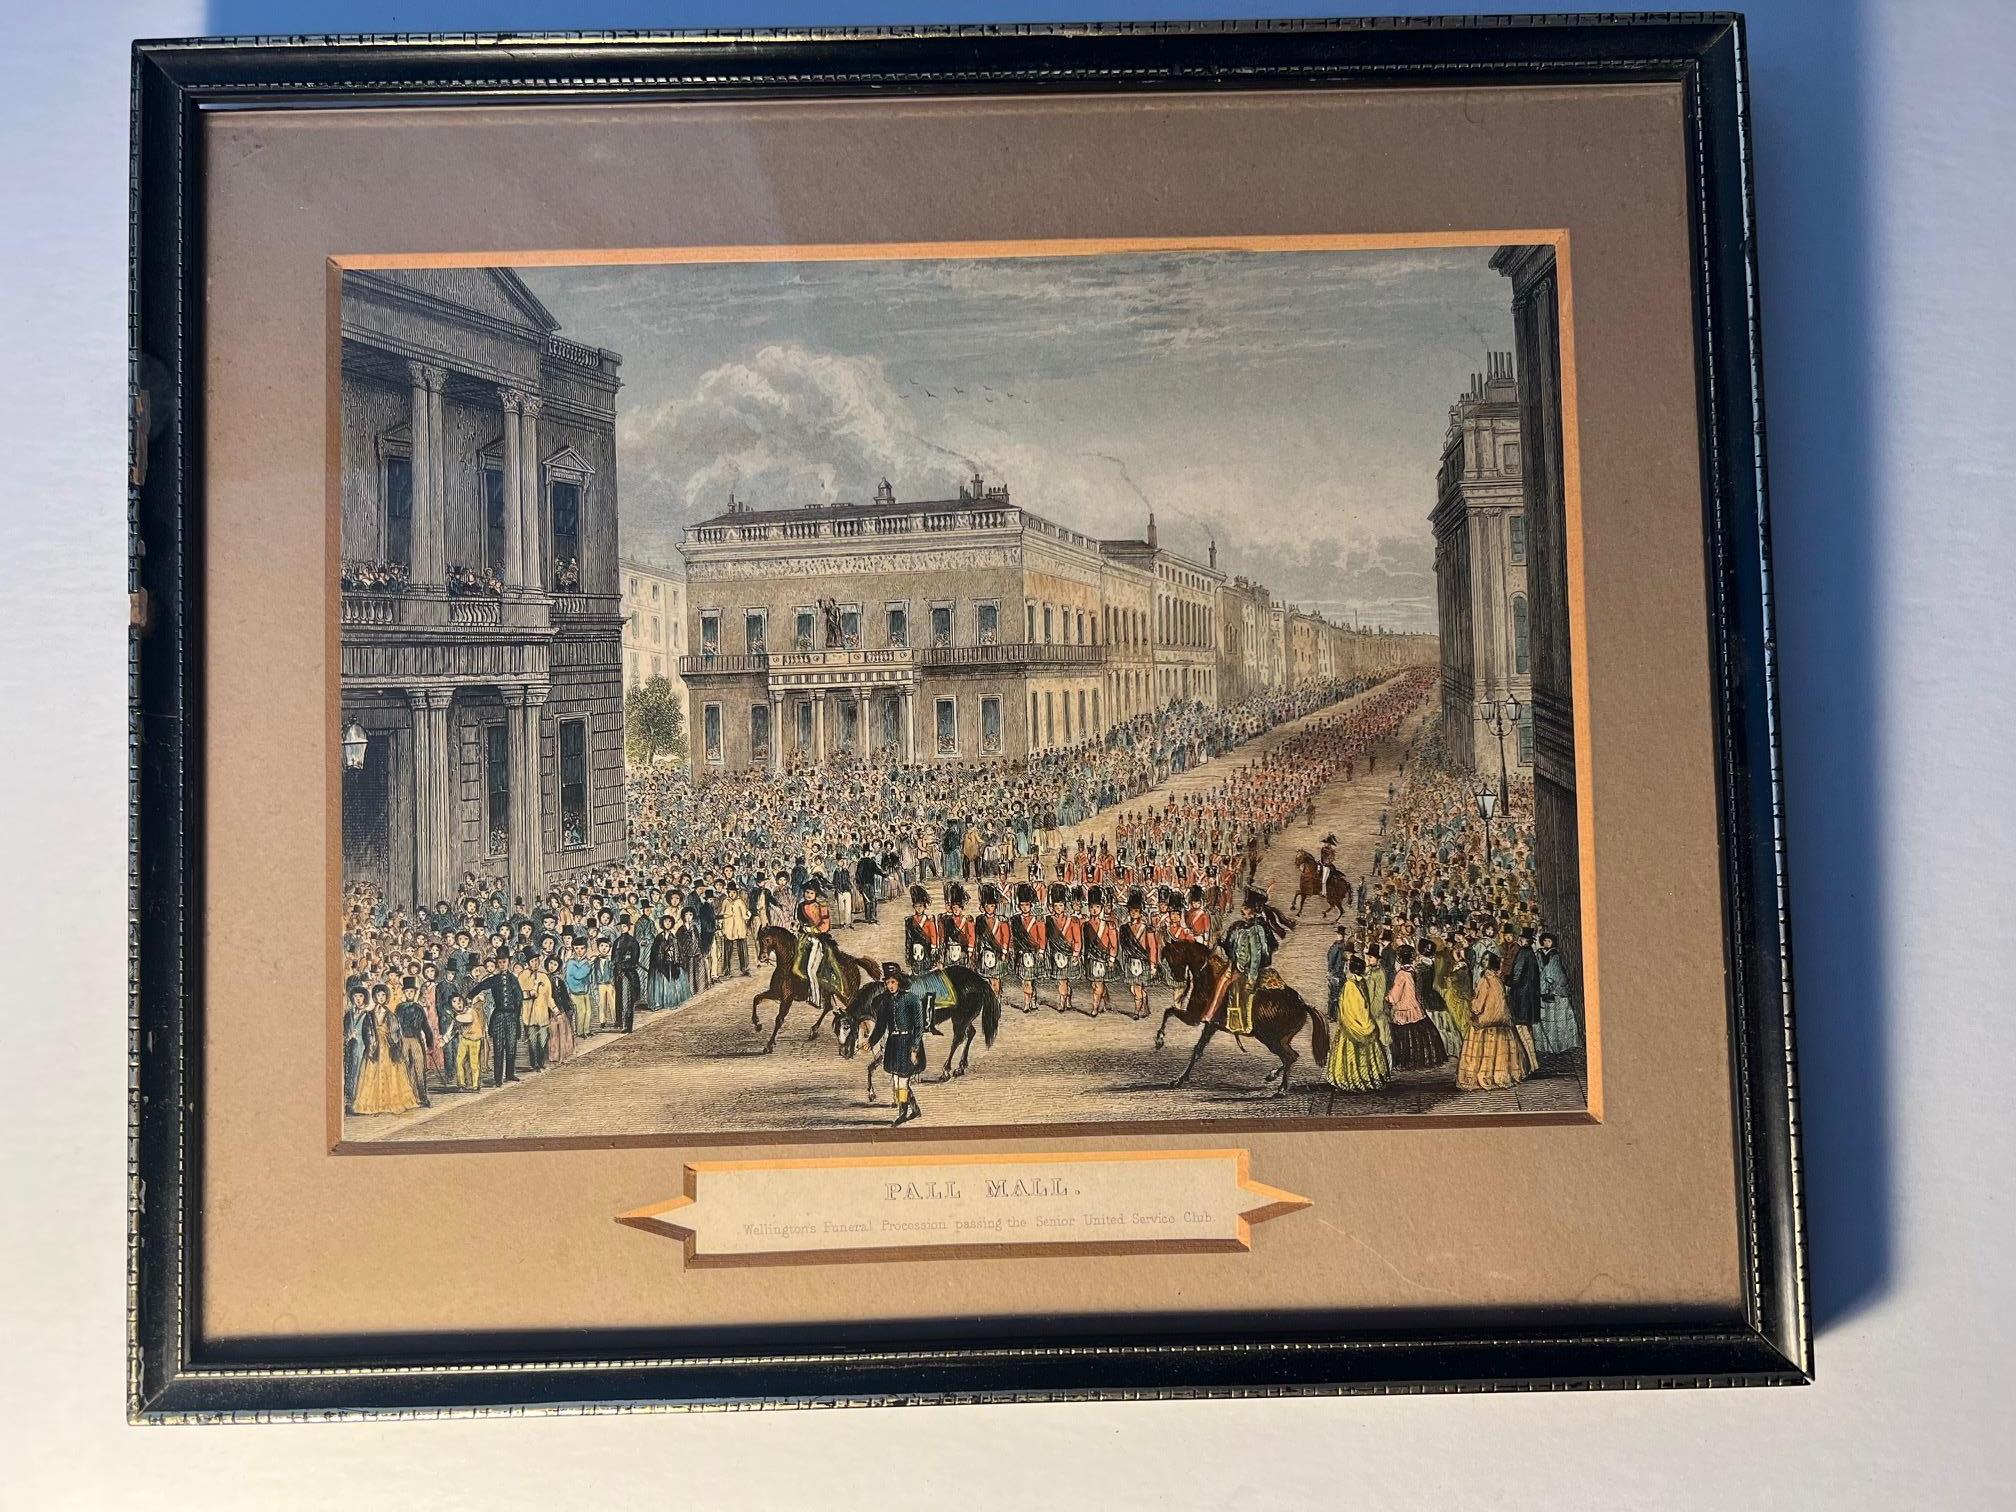 Naive hand coloured print of the funeral procession (Duke of Wellington) marching past the Senior United Service Club Pall Mall, London.

Rather nasty modern frame, probably 1990's.

Print condition is good, frame is fairly tatty, as can be seen in